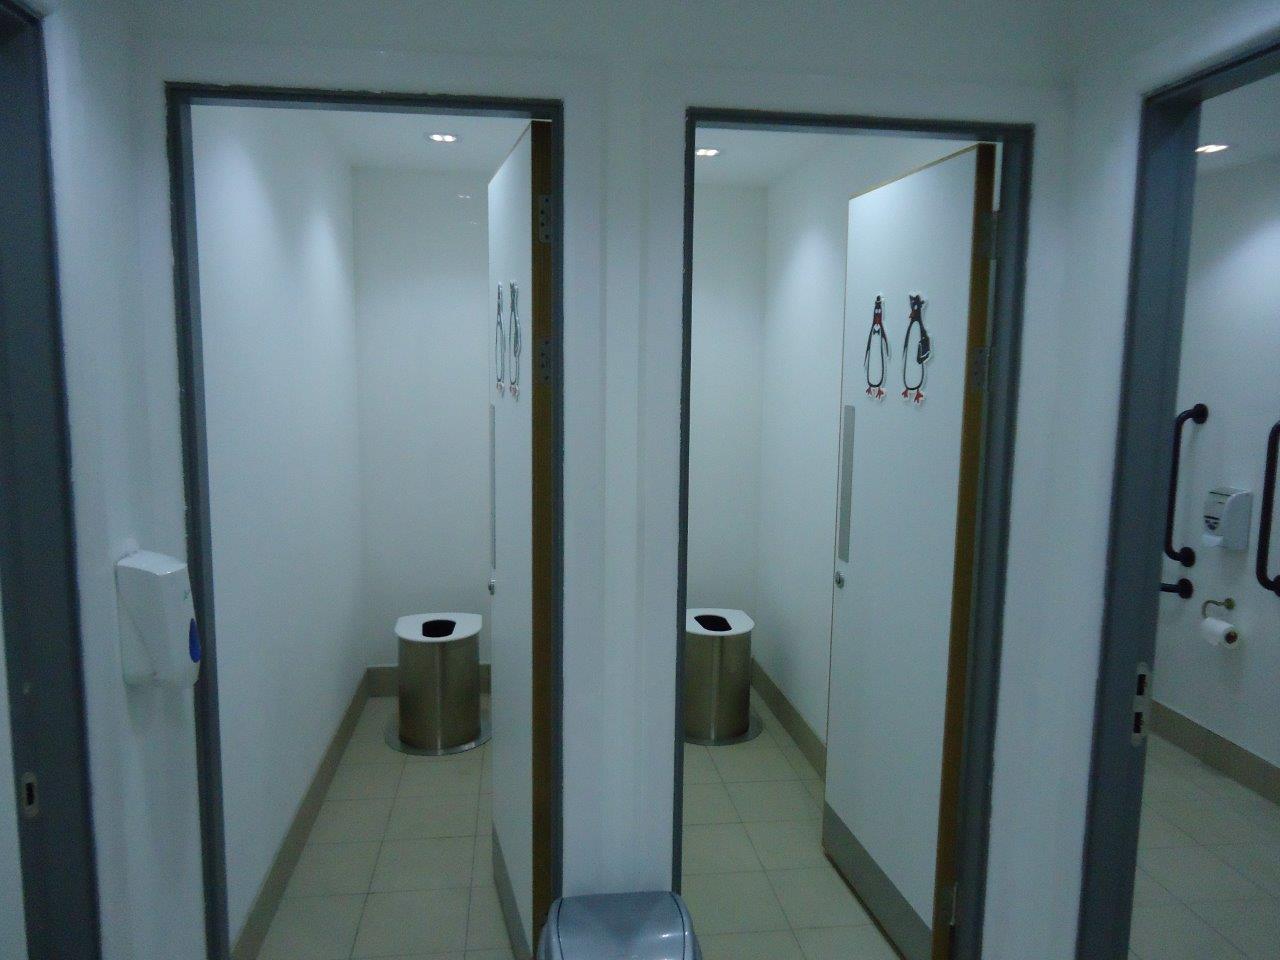 Golf Course toilets supplied by Natsol